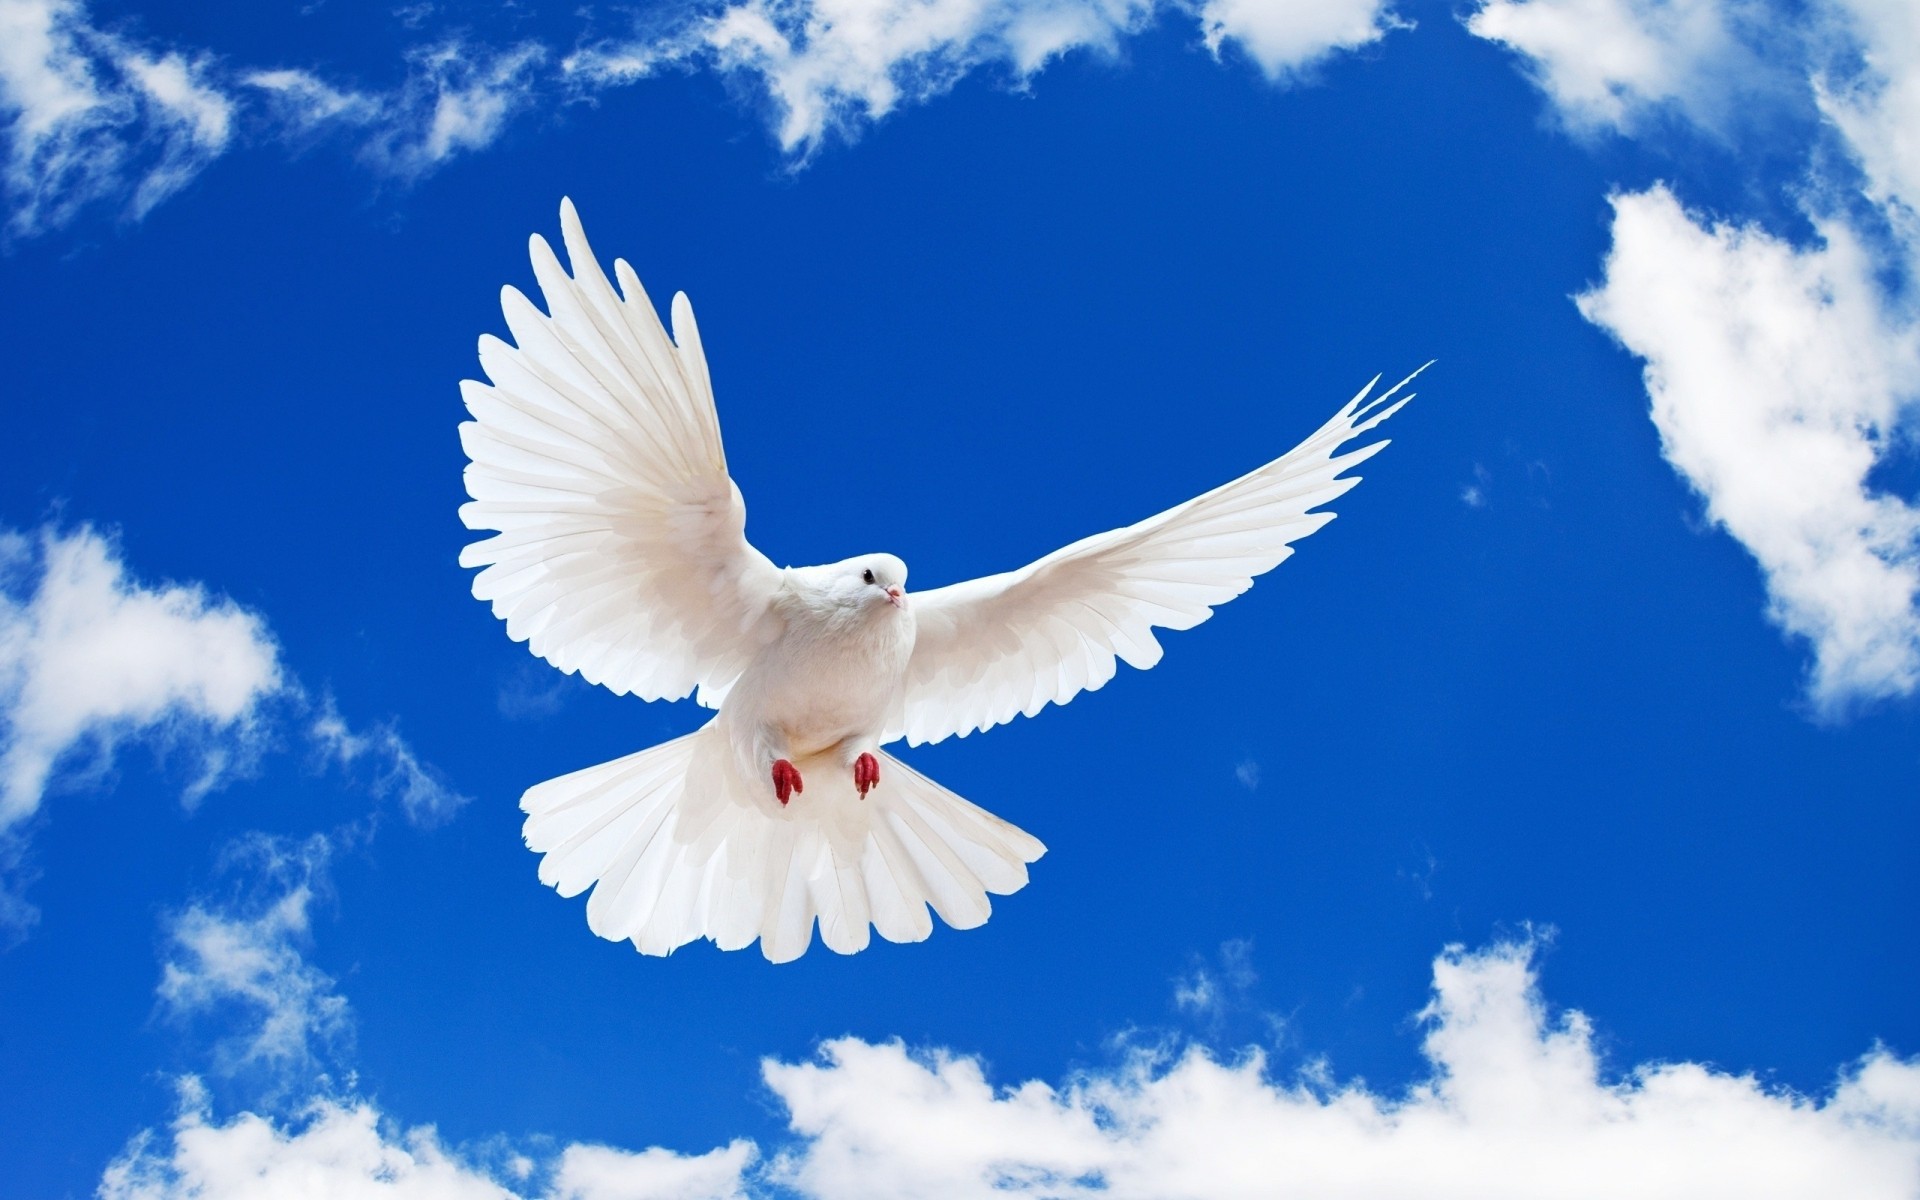 dove bird nature freedom flight sky pigeon wing fly outdoors seagulls feather summer heaven wildlife animals peace